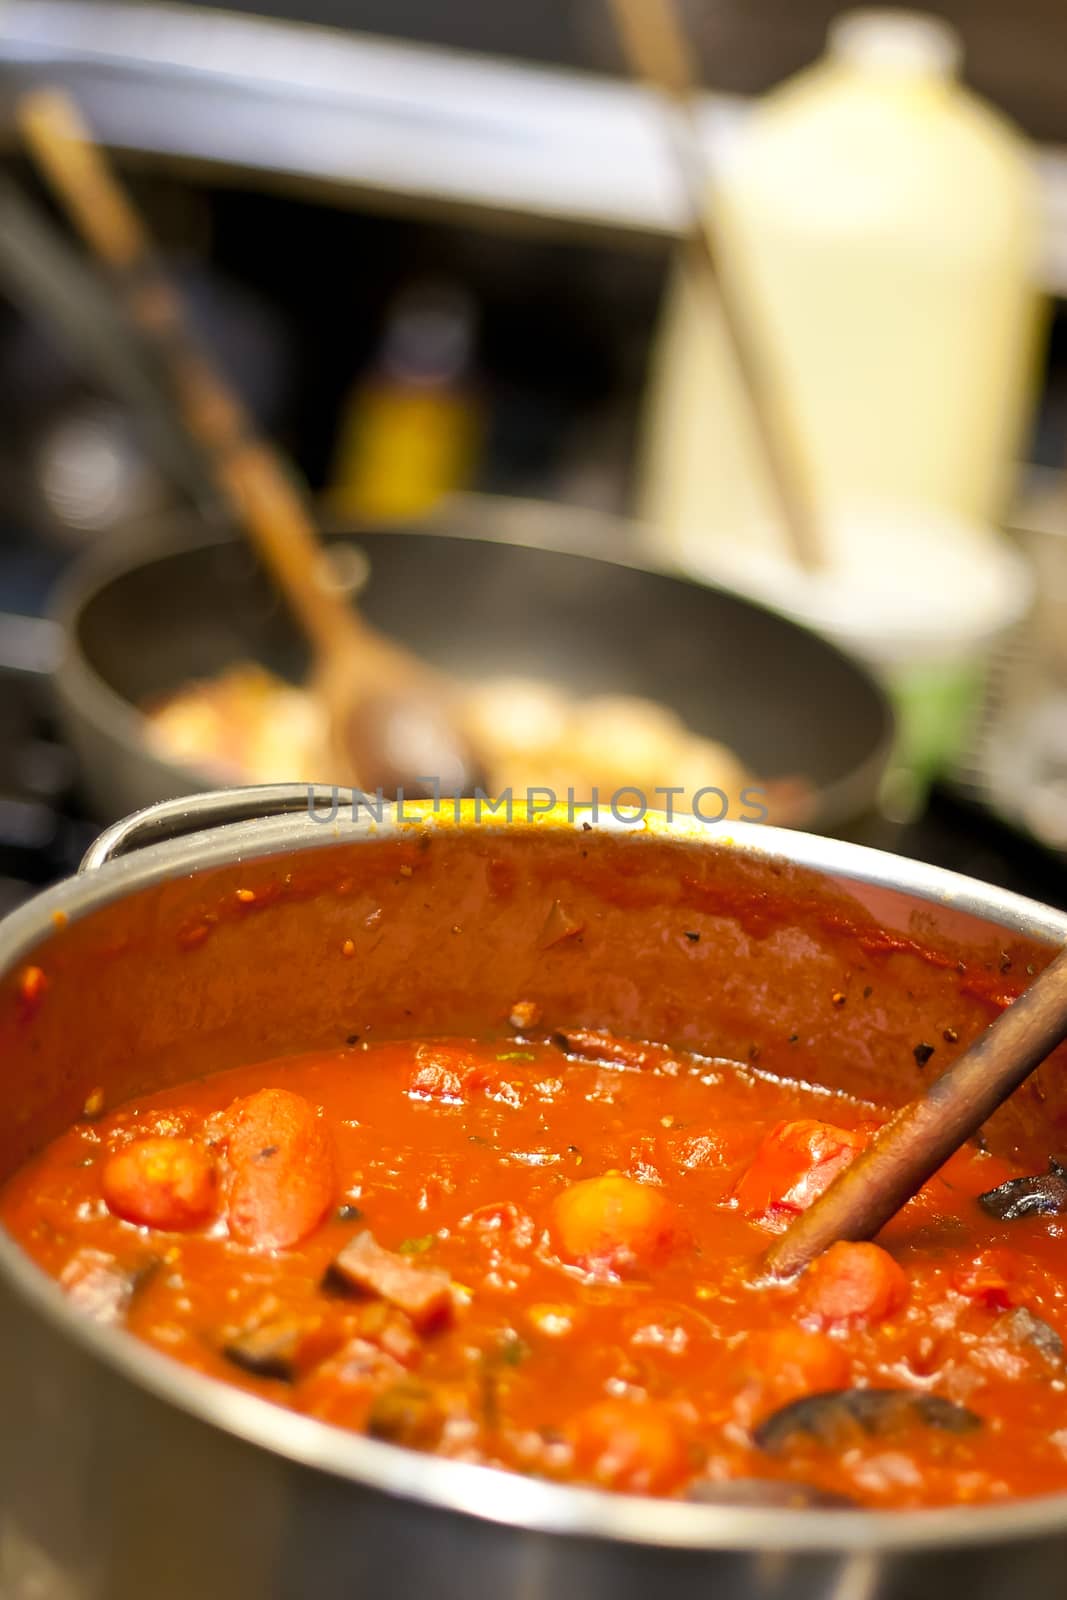 Tomato based pasta sauce simmering in a pot in a commercial kitchen at a pizza restaurant.